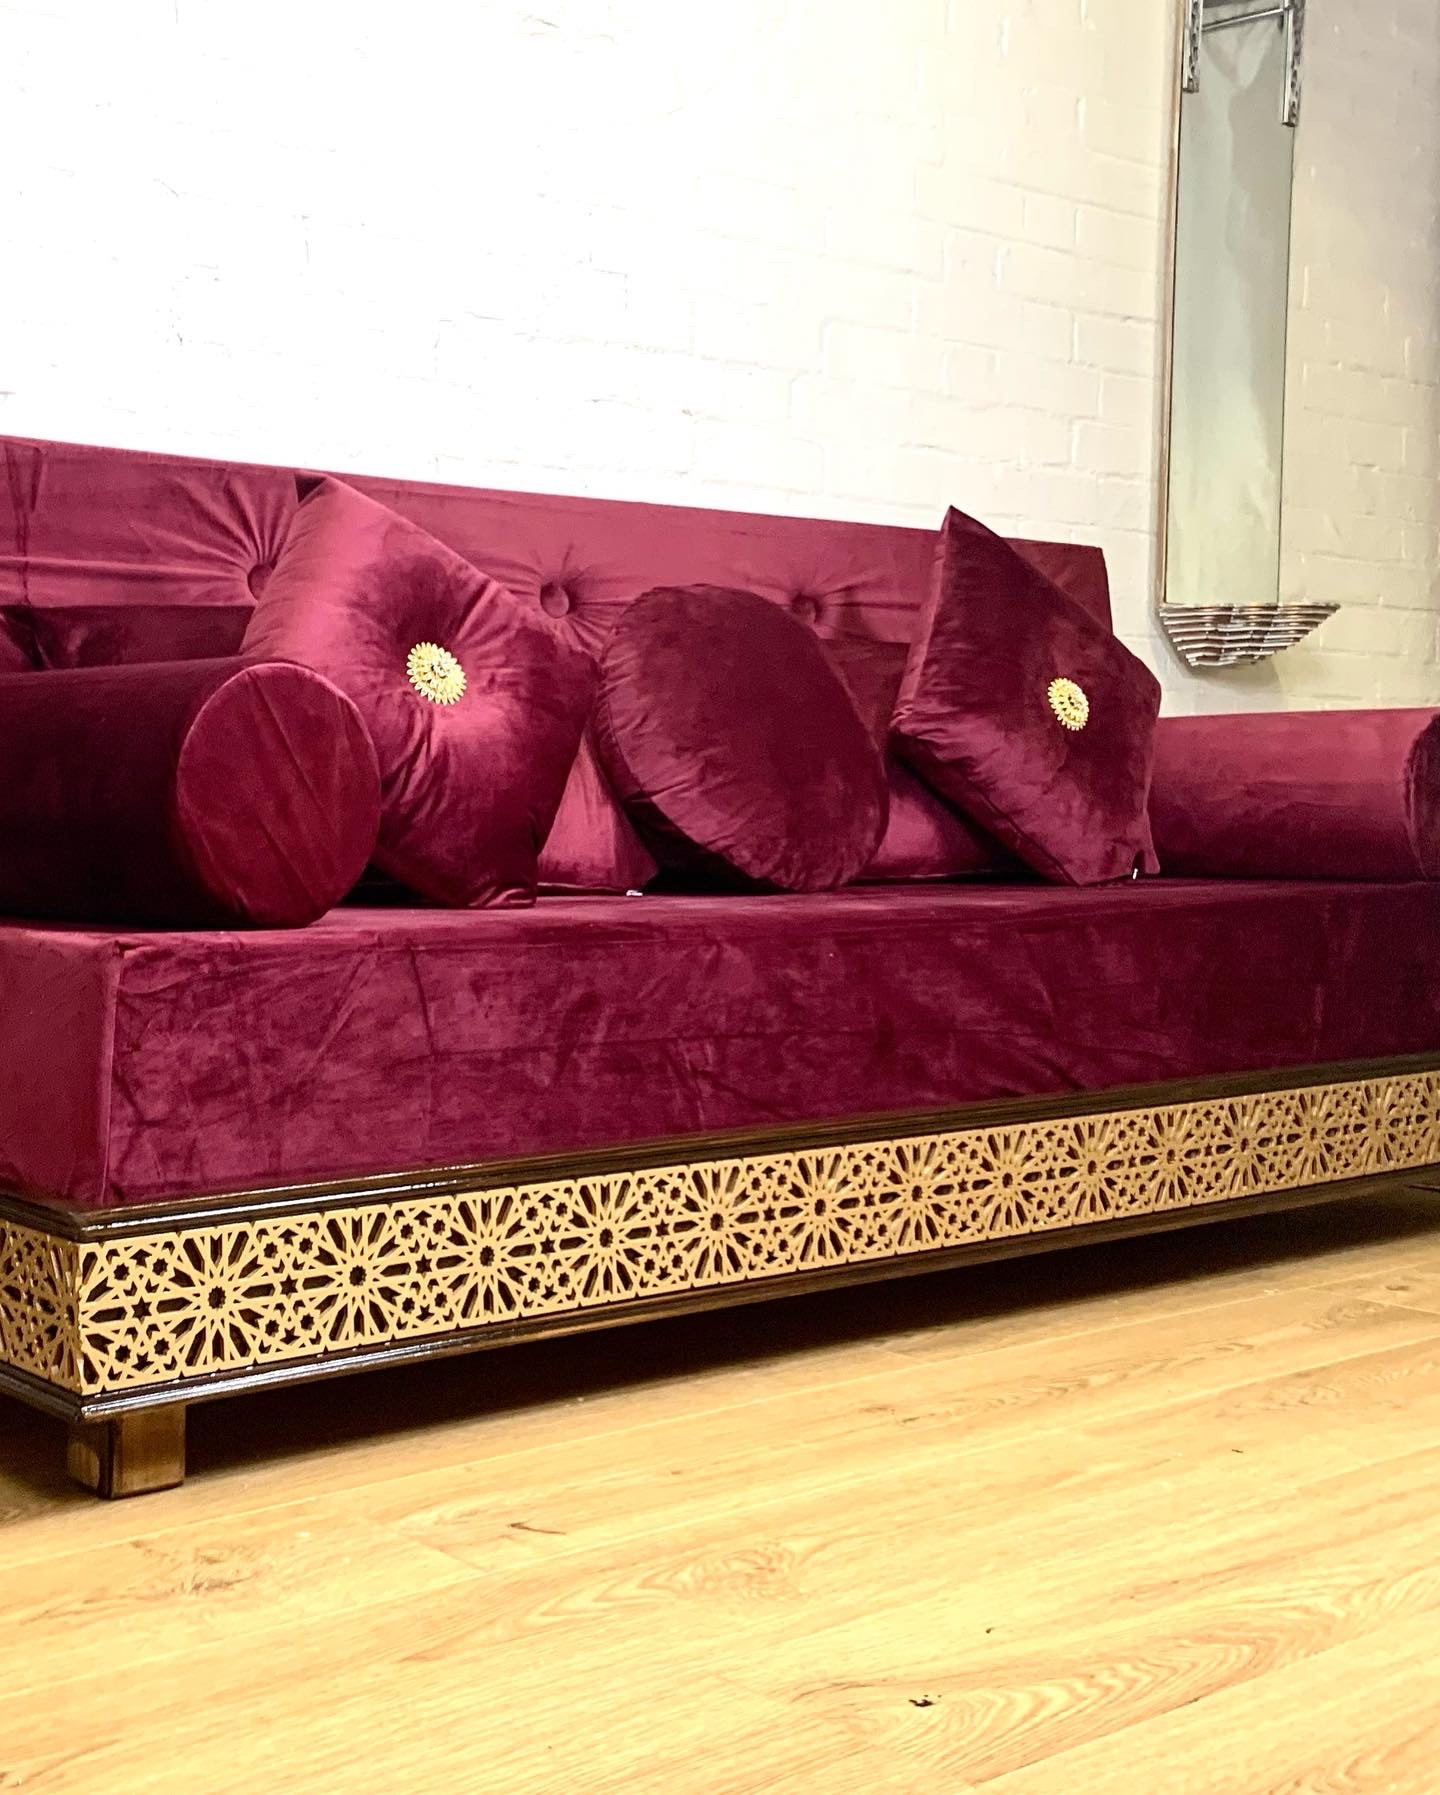 Luxurious Arabesque Moroccan Sofa Moroccan Daybed with carvings in Burgundy Velvet.